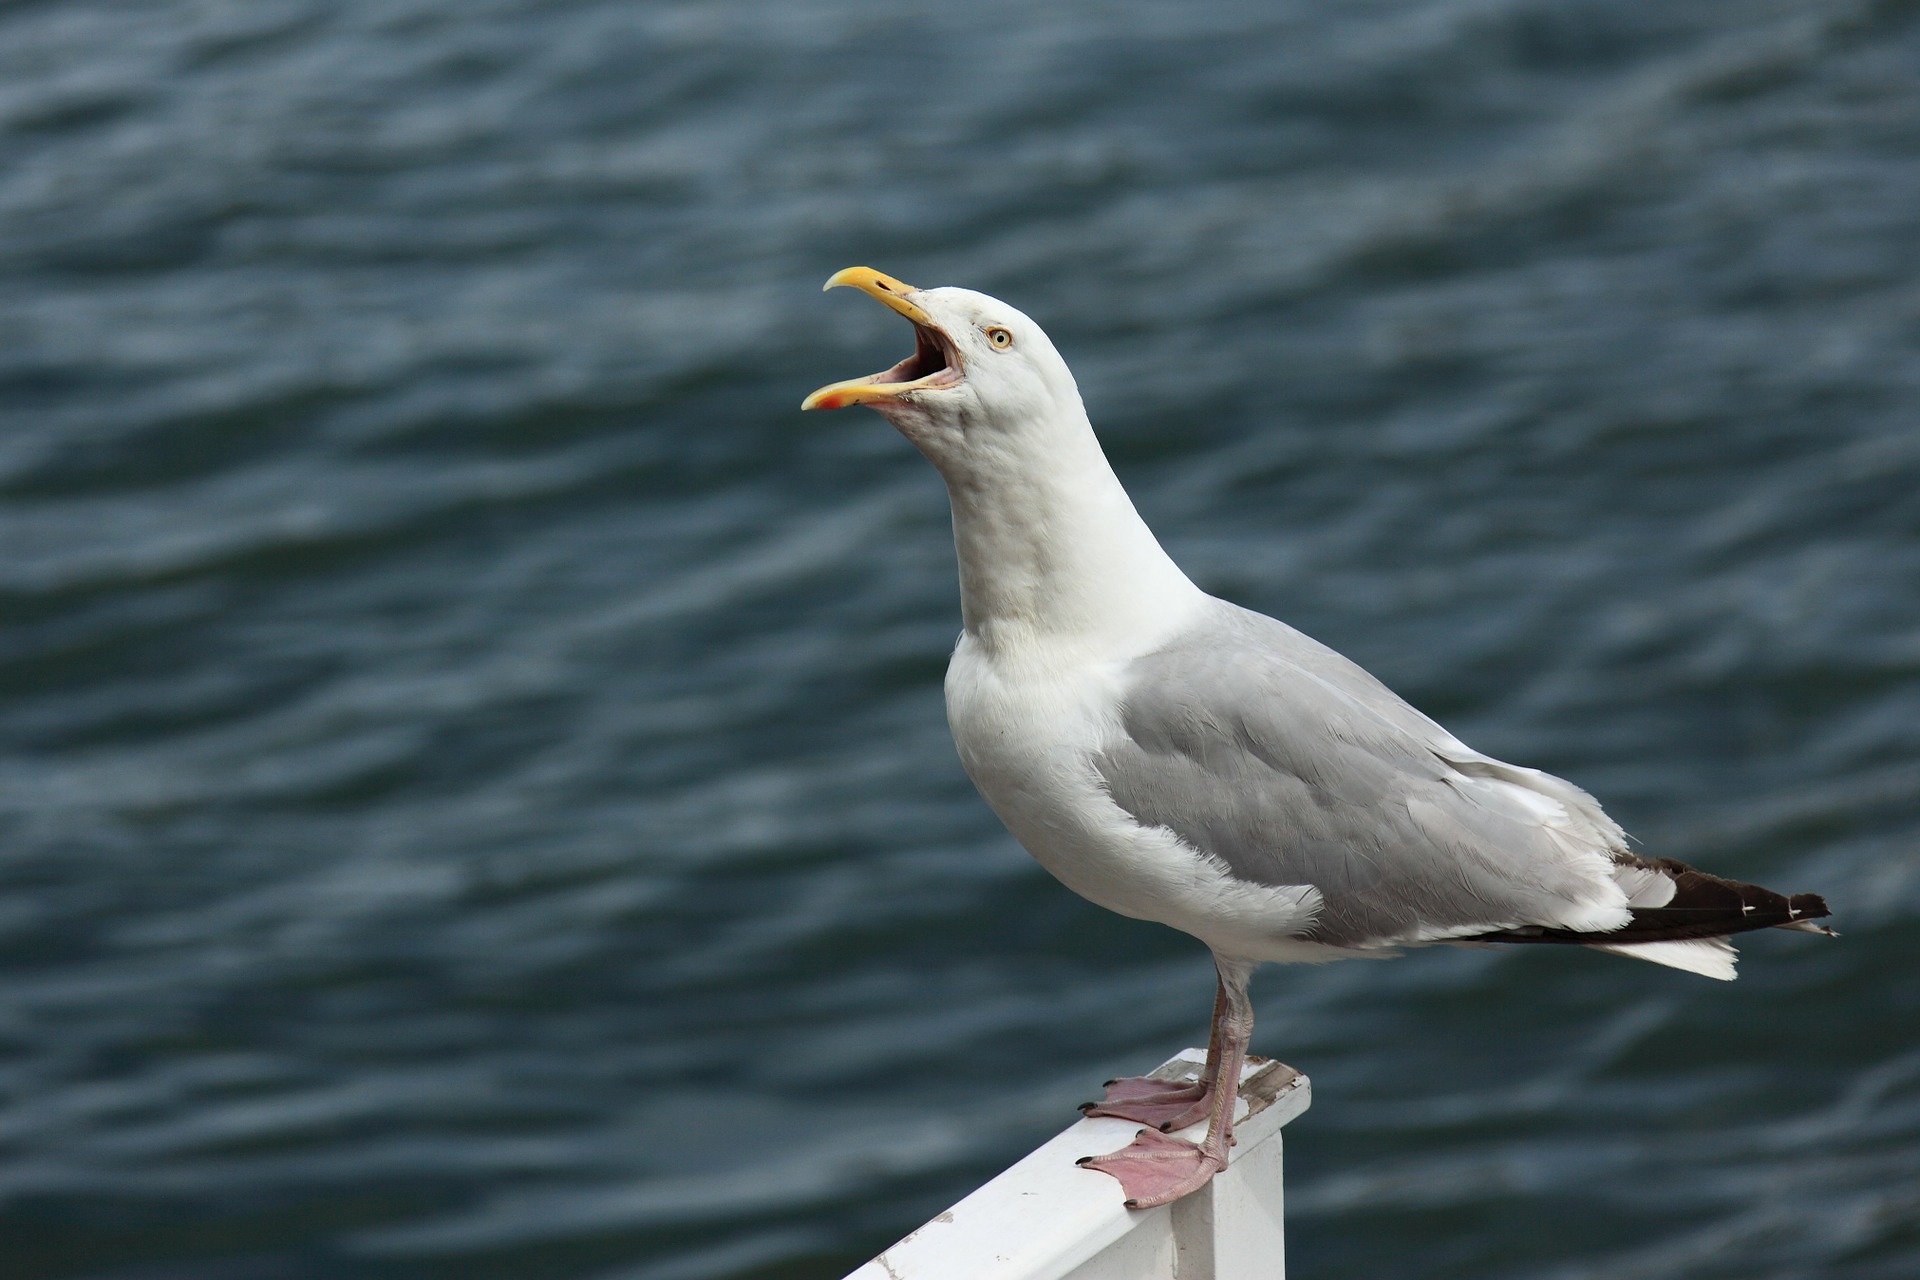 A seagull with an open mouth looking like he is making noise